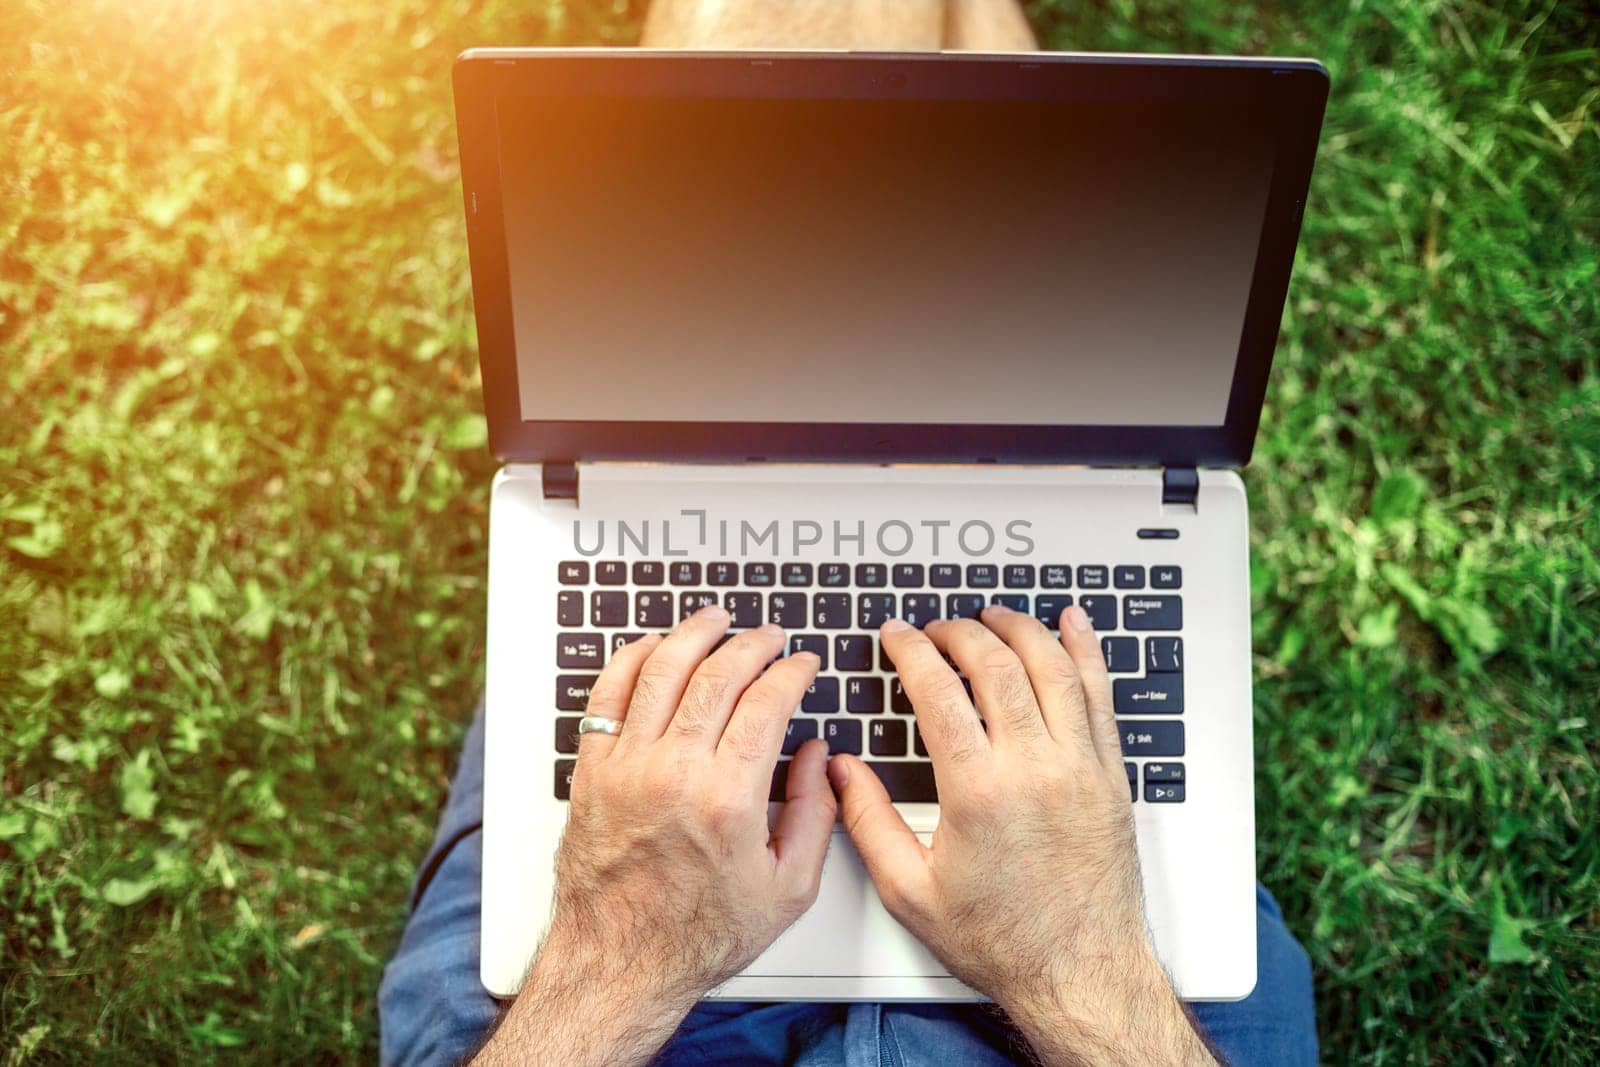 Young blogger sitting on grass and working with laptop. Copy space. Sun flare